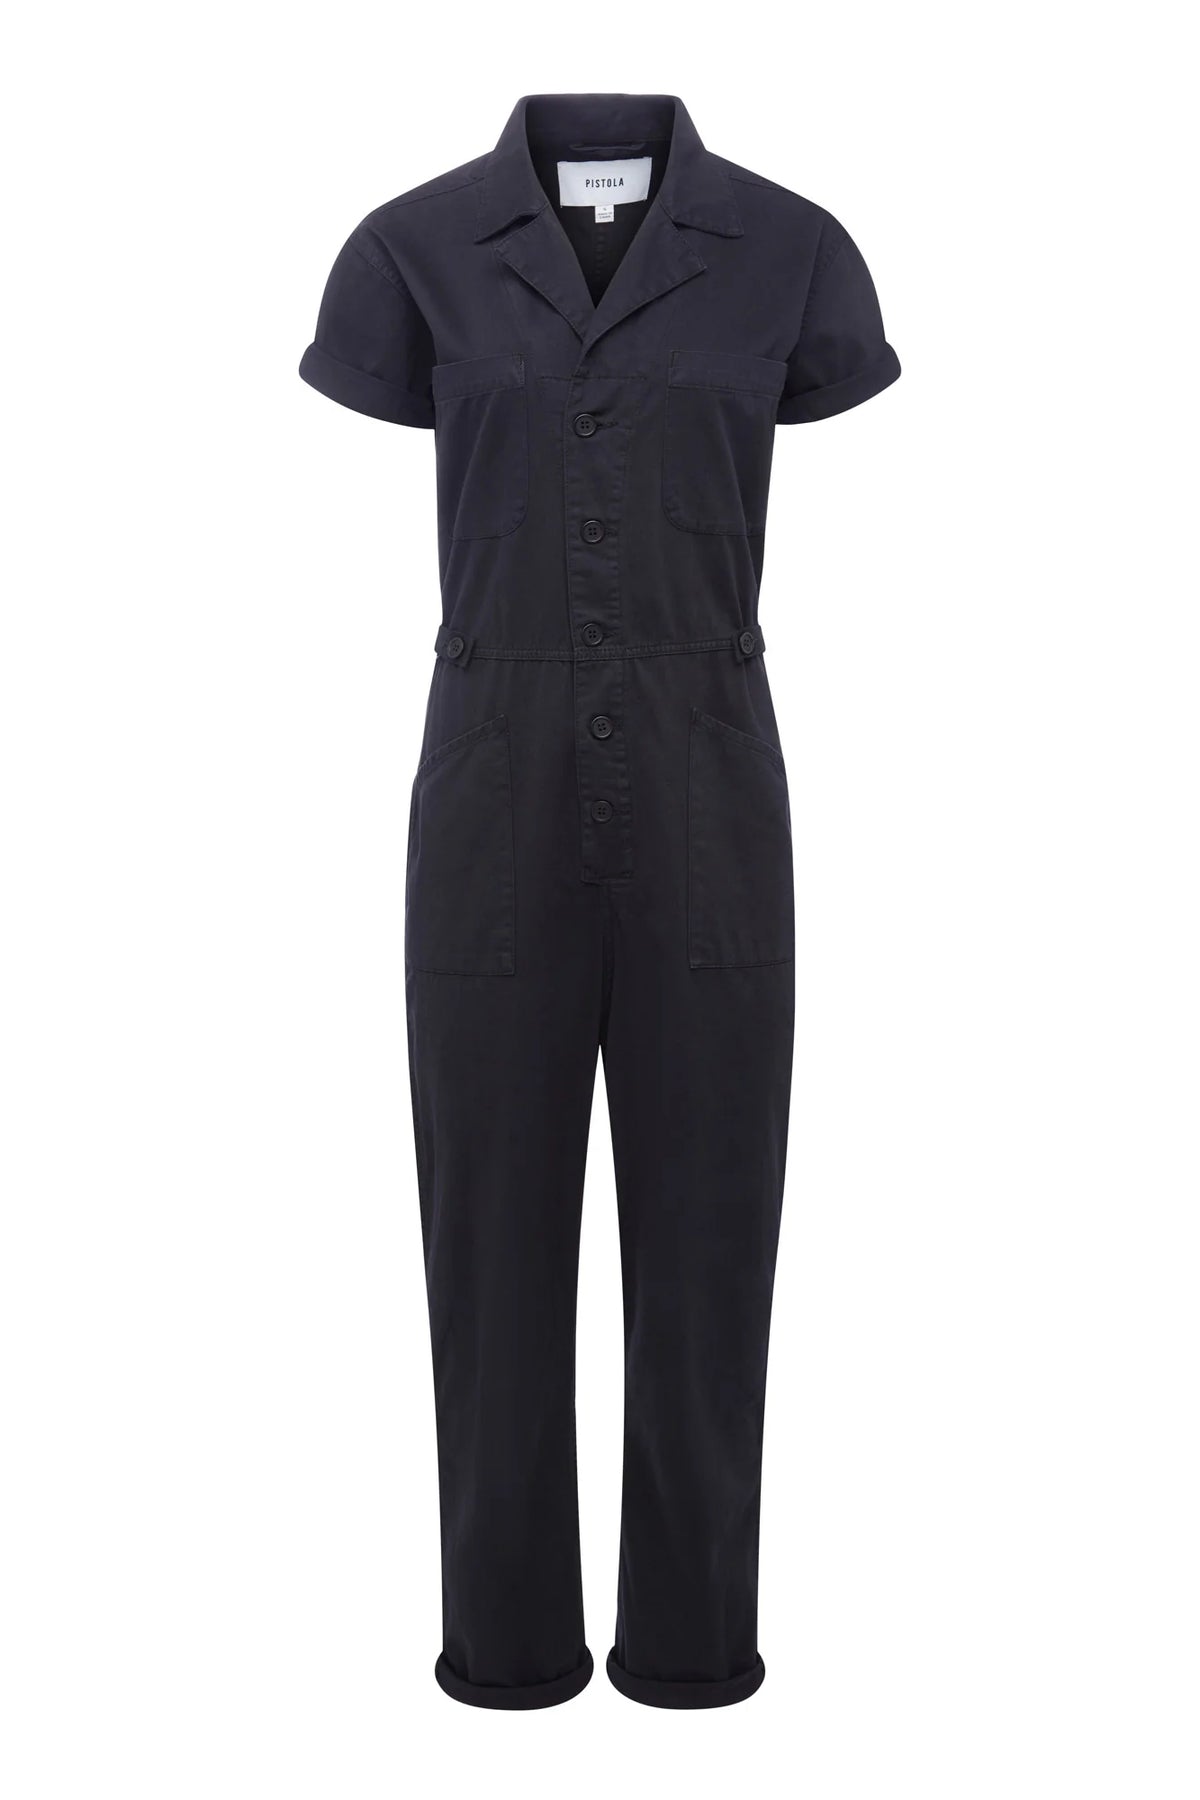 Pistola Grover Field Suit - Fade To Black